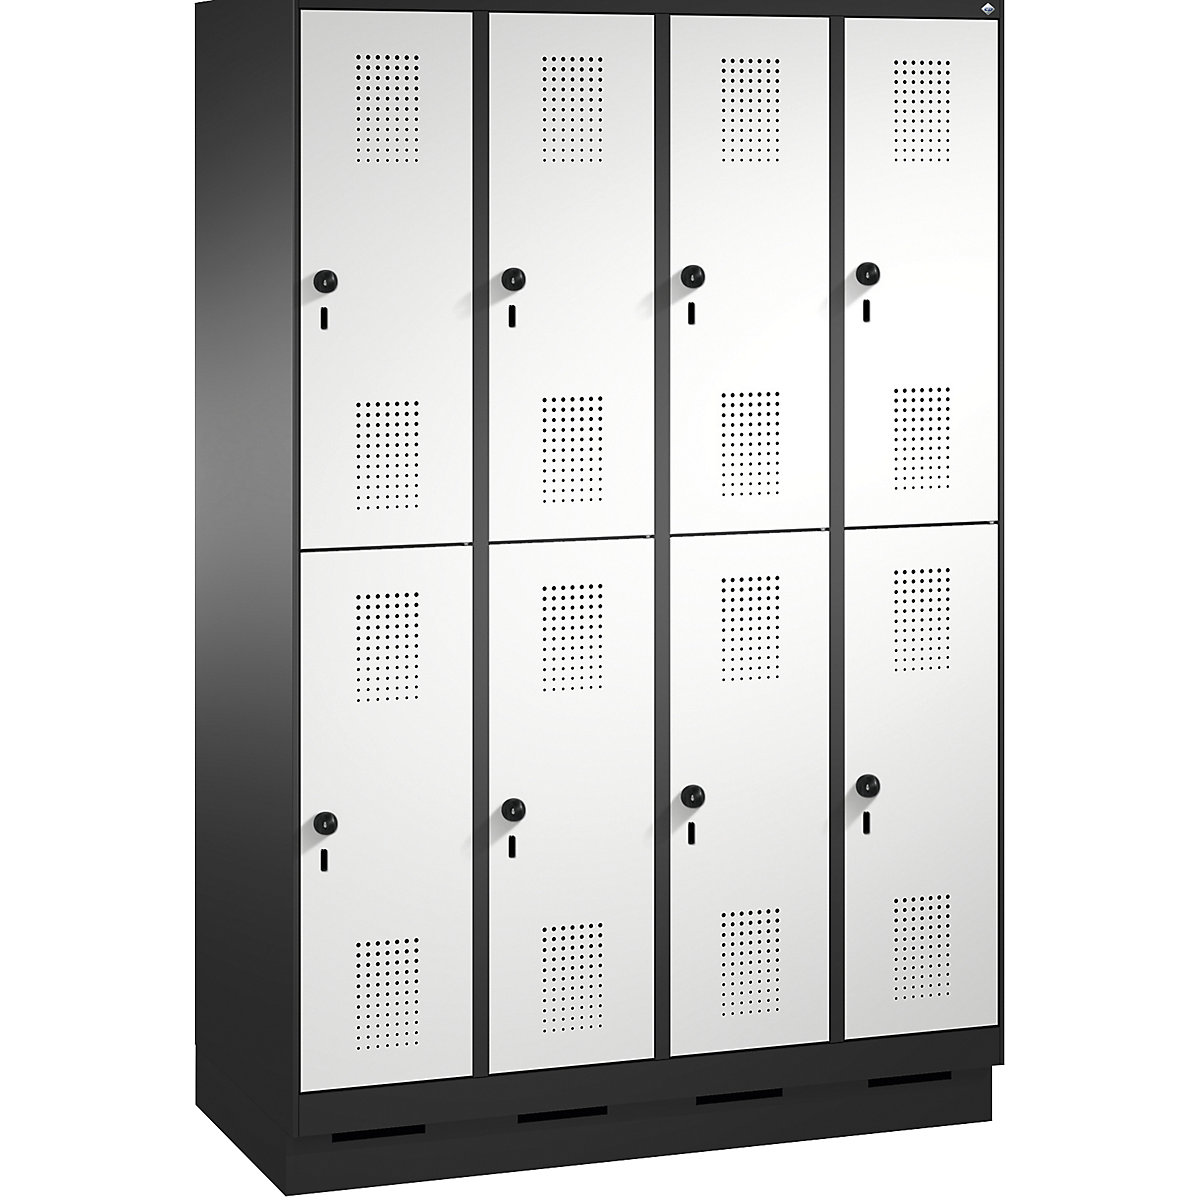 EVOLO cloakroom locker, double tier, with plinth – C+P, 4 compartments, 2 shelf compartments each, compartment width 300 mm, black grey / light grey-6